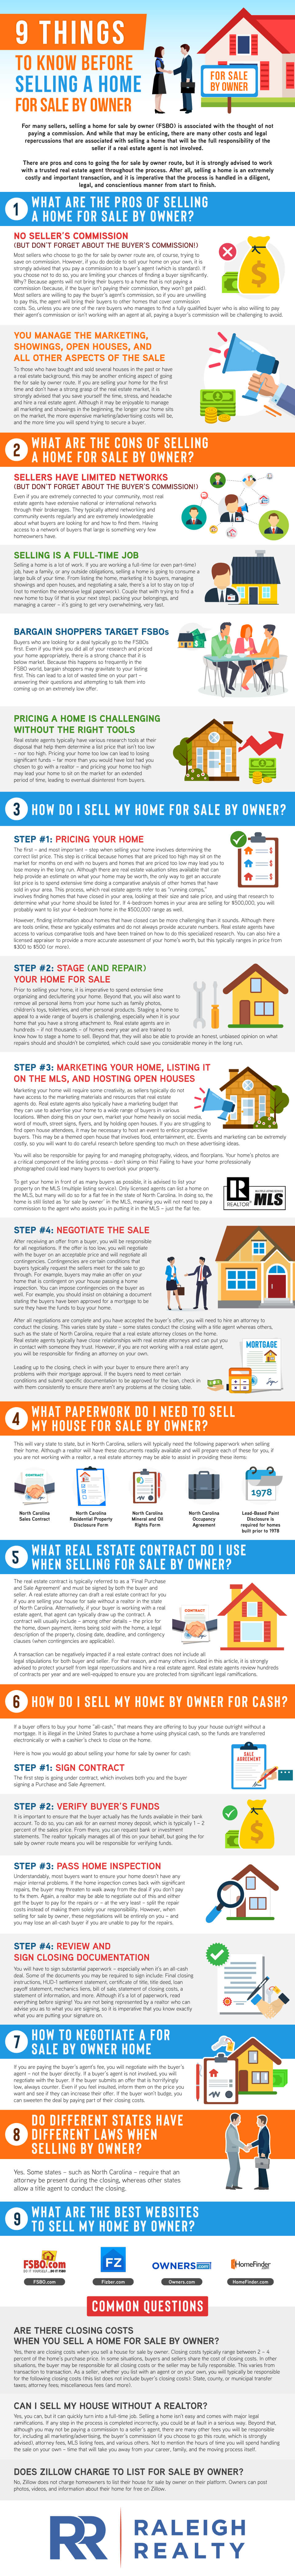 Selling home for sale by owner pros, cons - How do I sell my home for sale by owner in Raleigh, NC